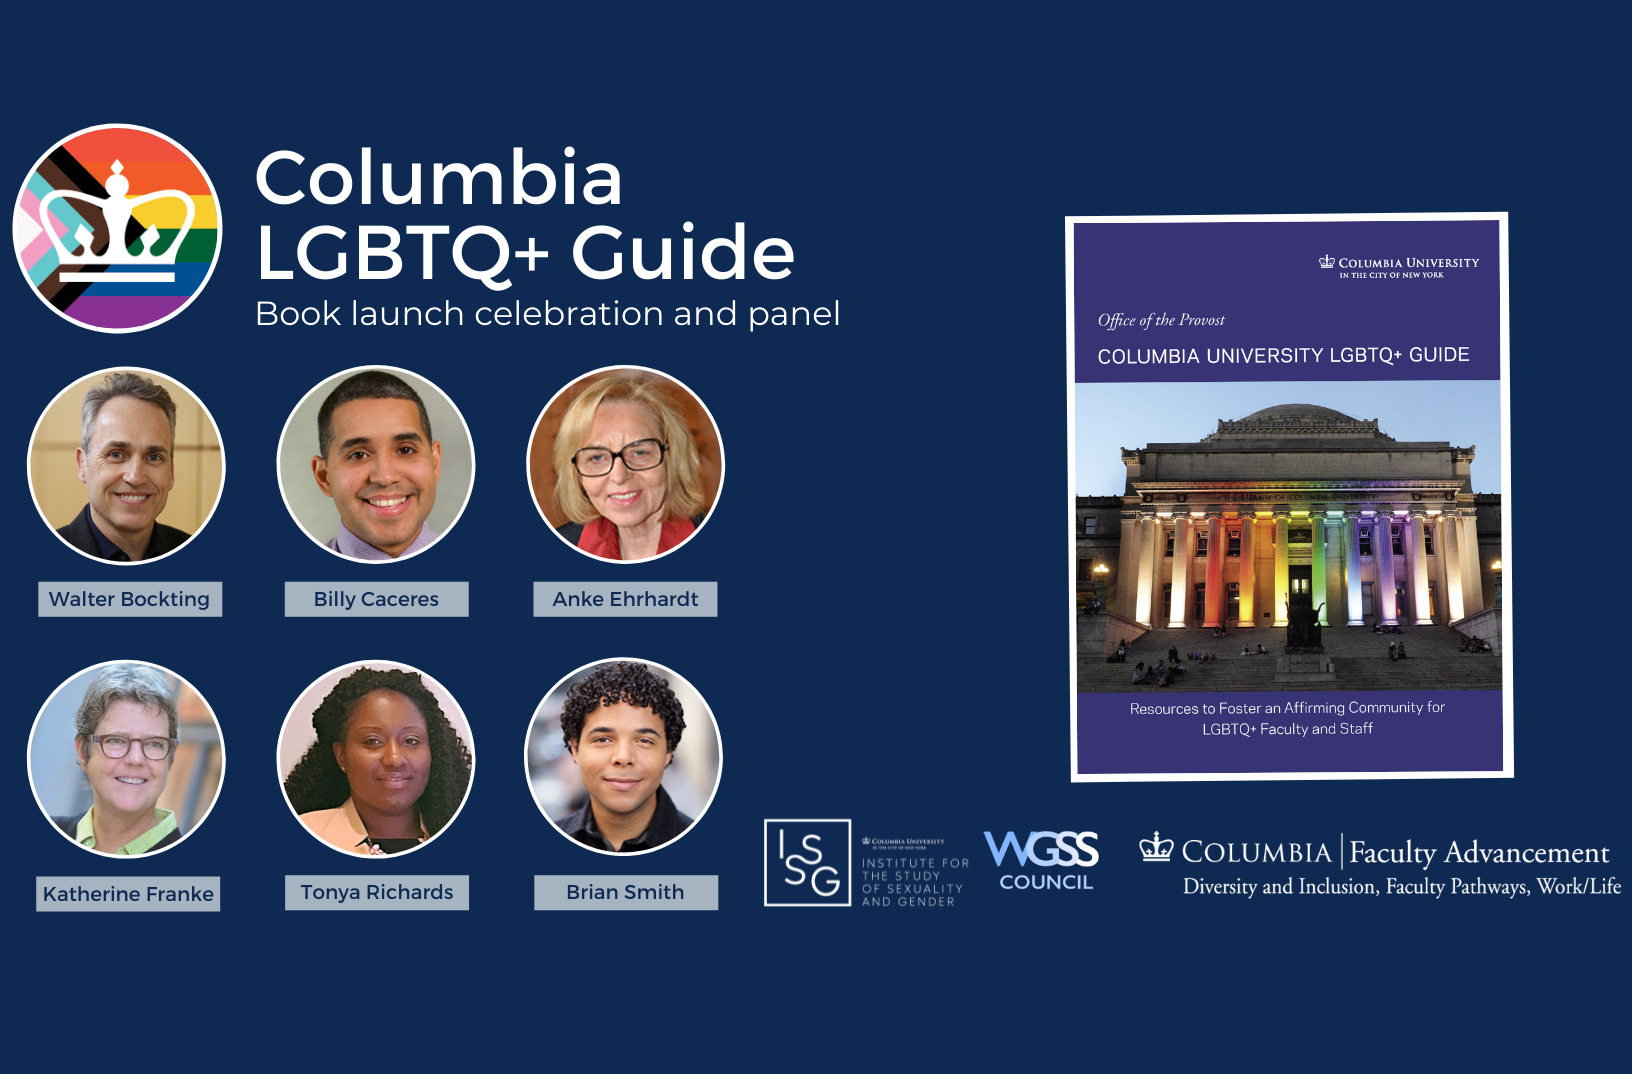 LGBTQ+ Guide Book Launch and Celebration panel